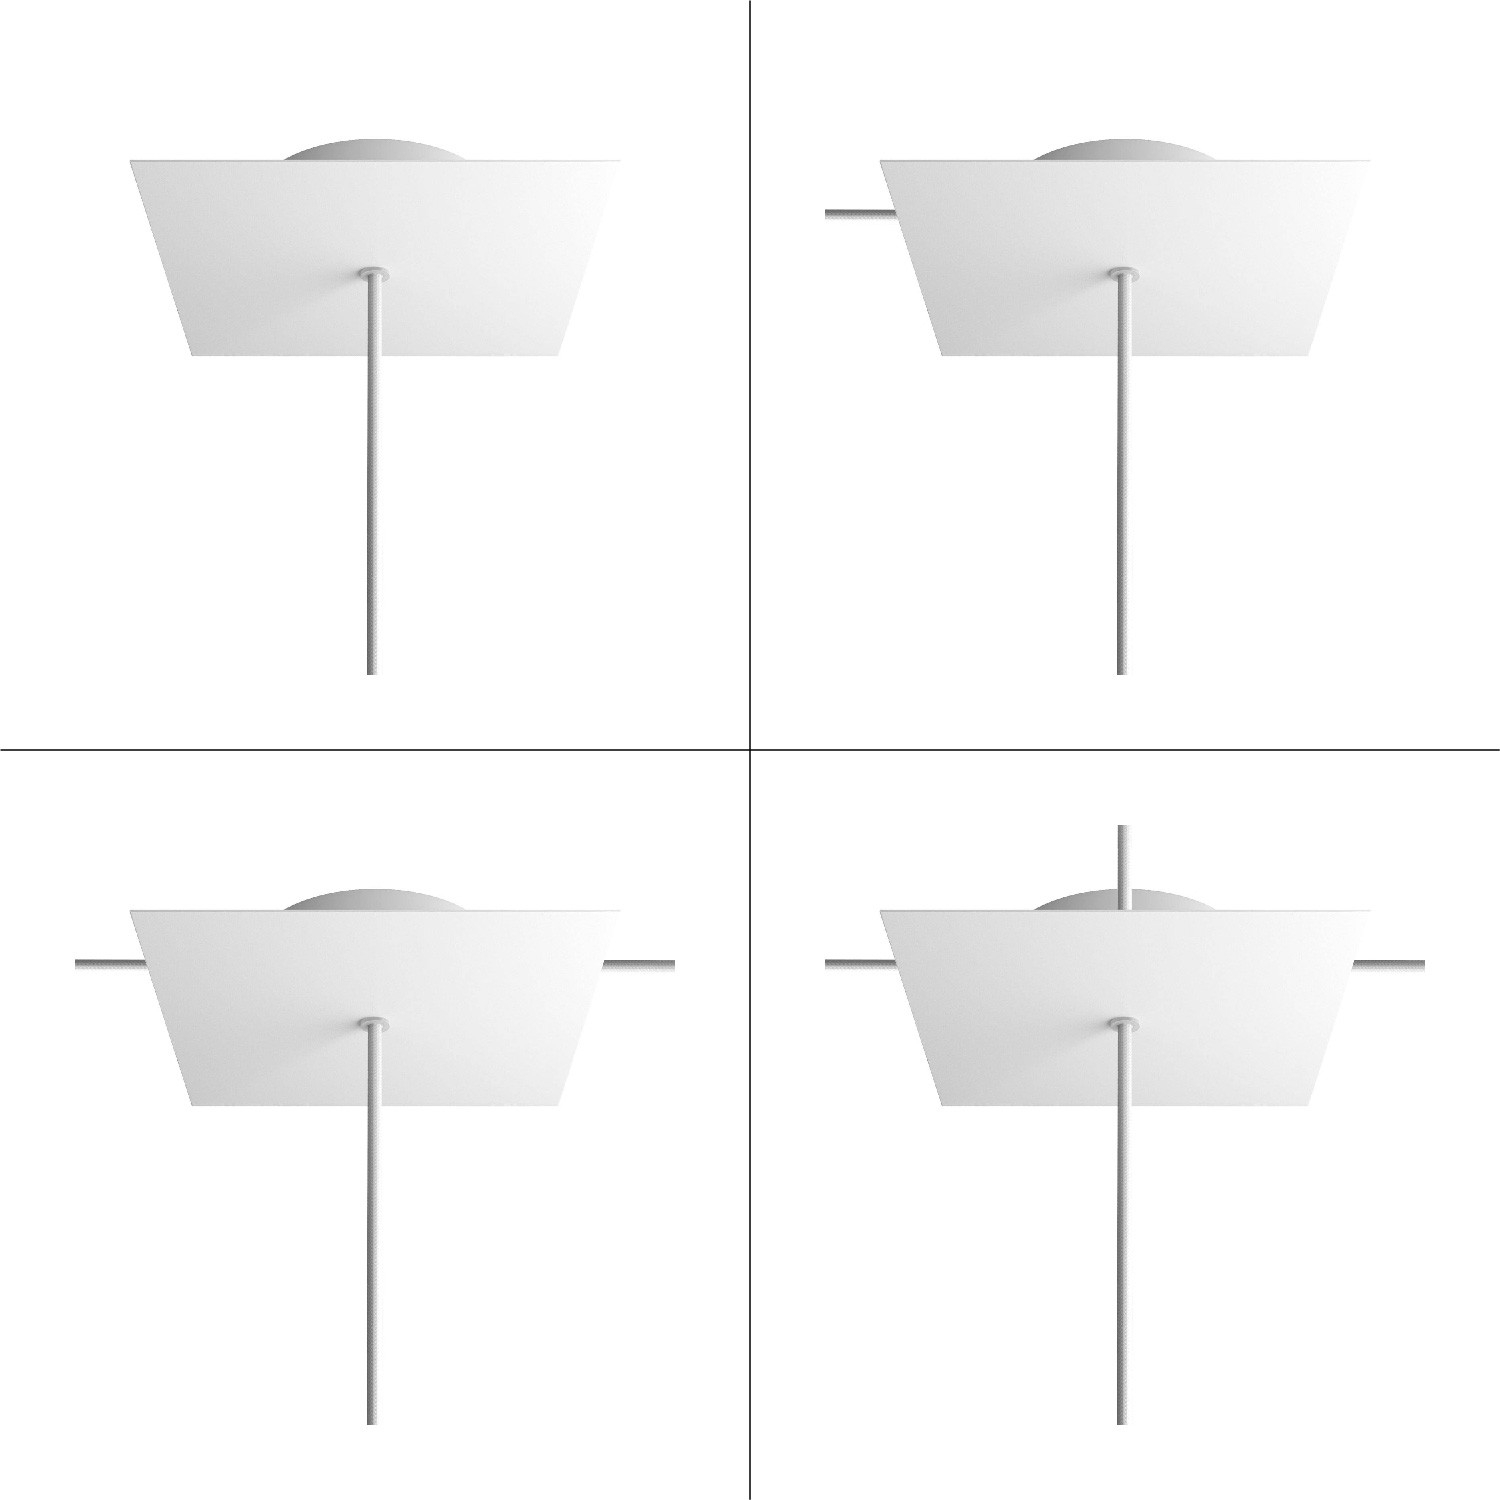 1 Hole - LARGE Square Ceiling Canopy Kit - Rose One System